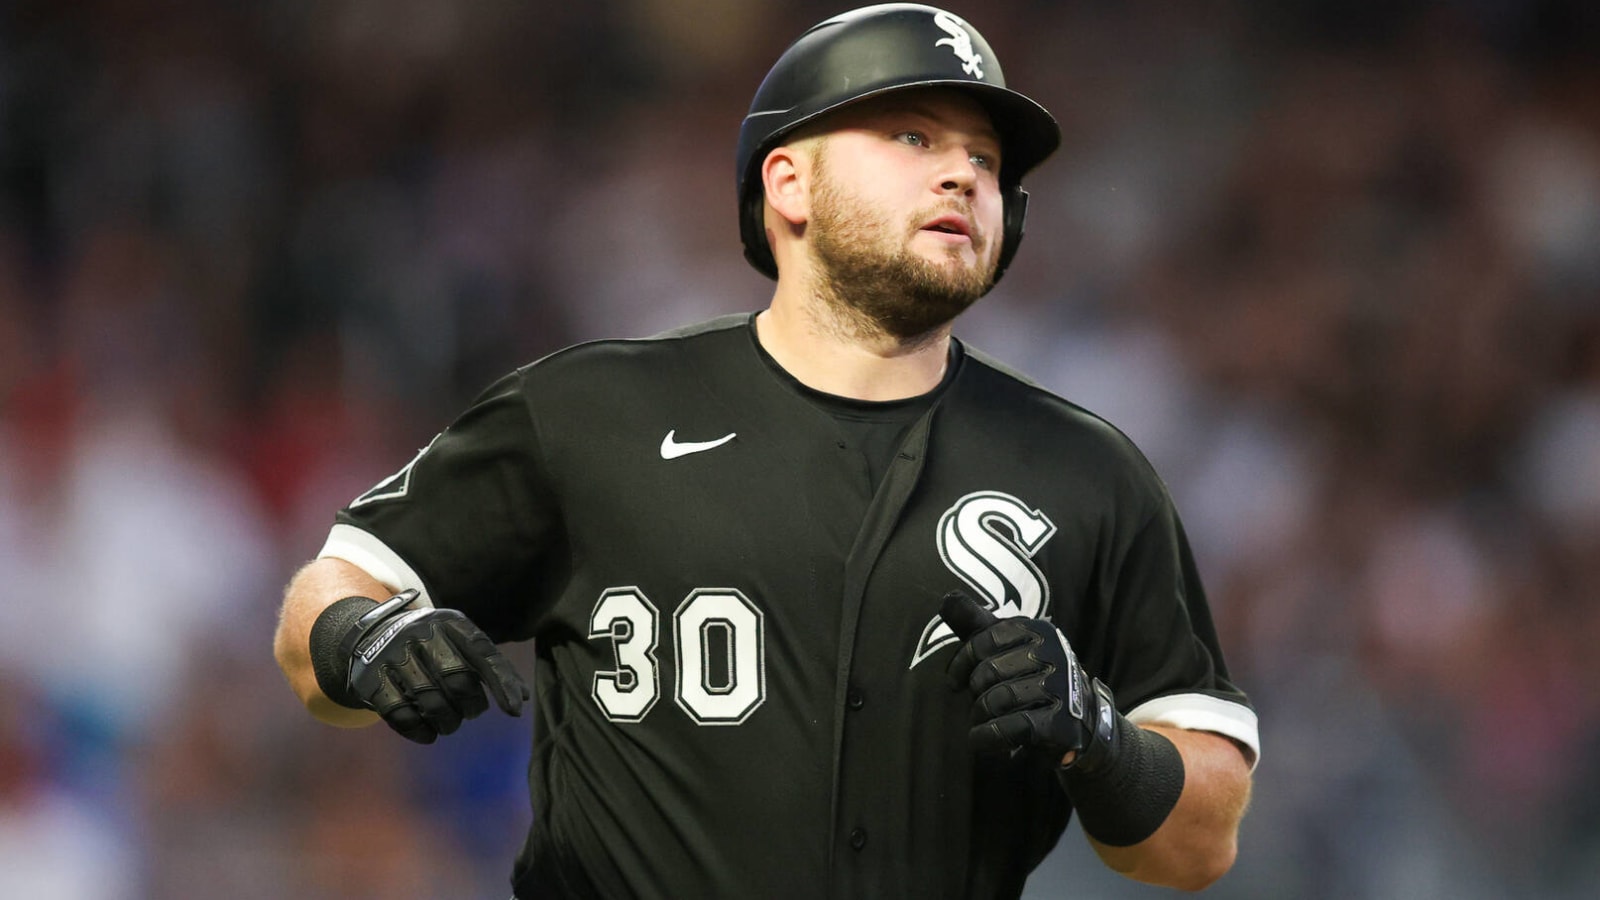 Reports: Marlins obtain slugger Jake Burger from White Sox